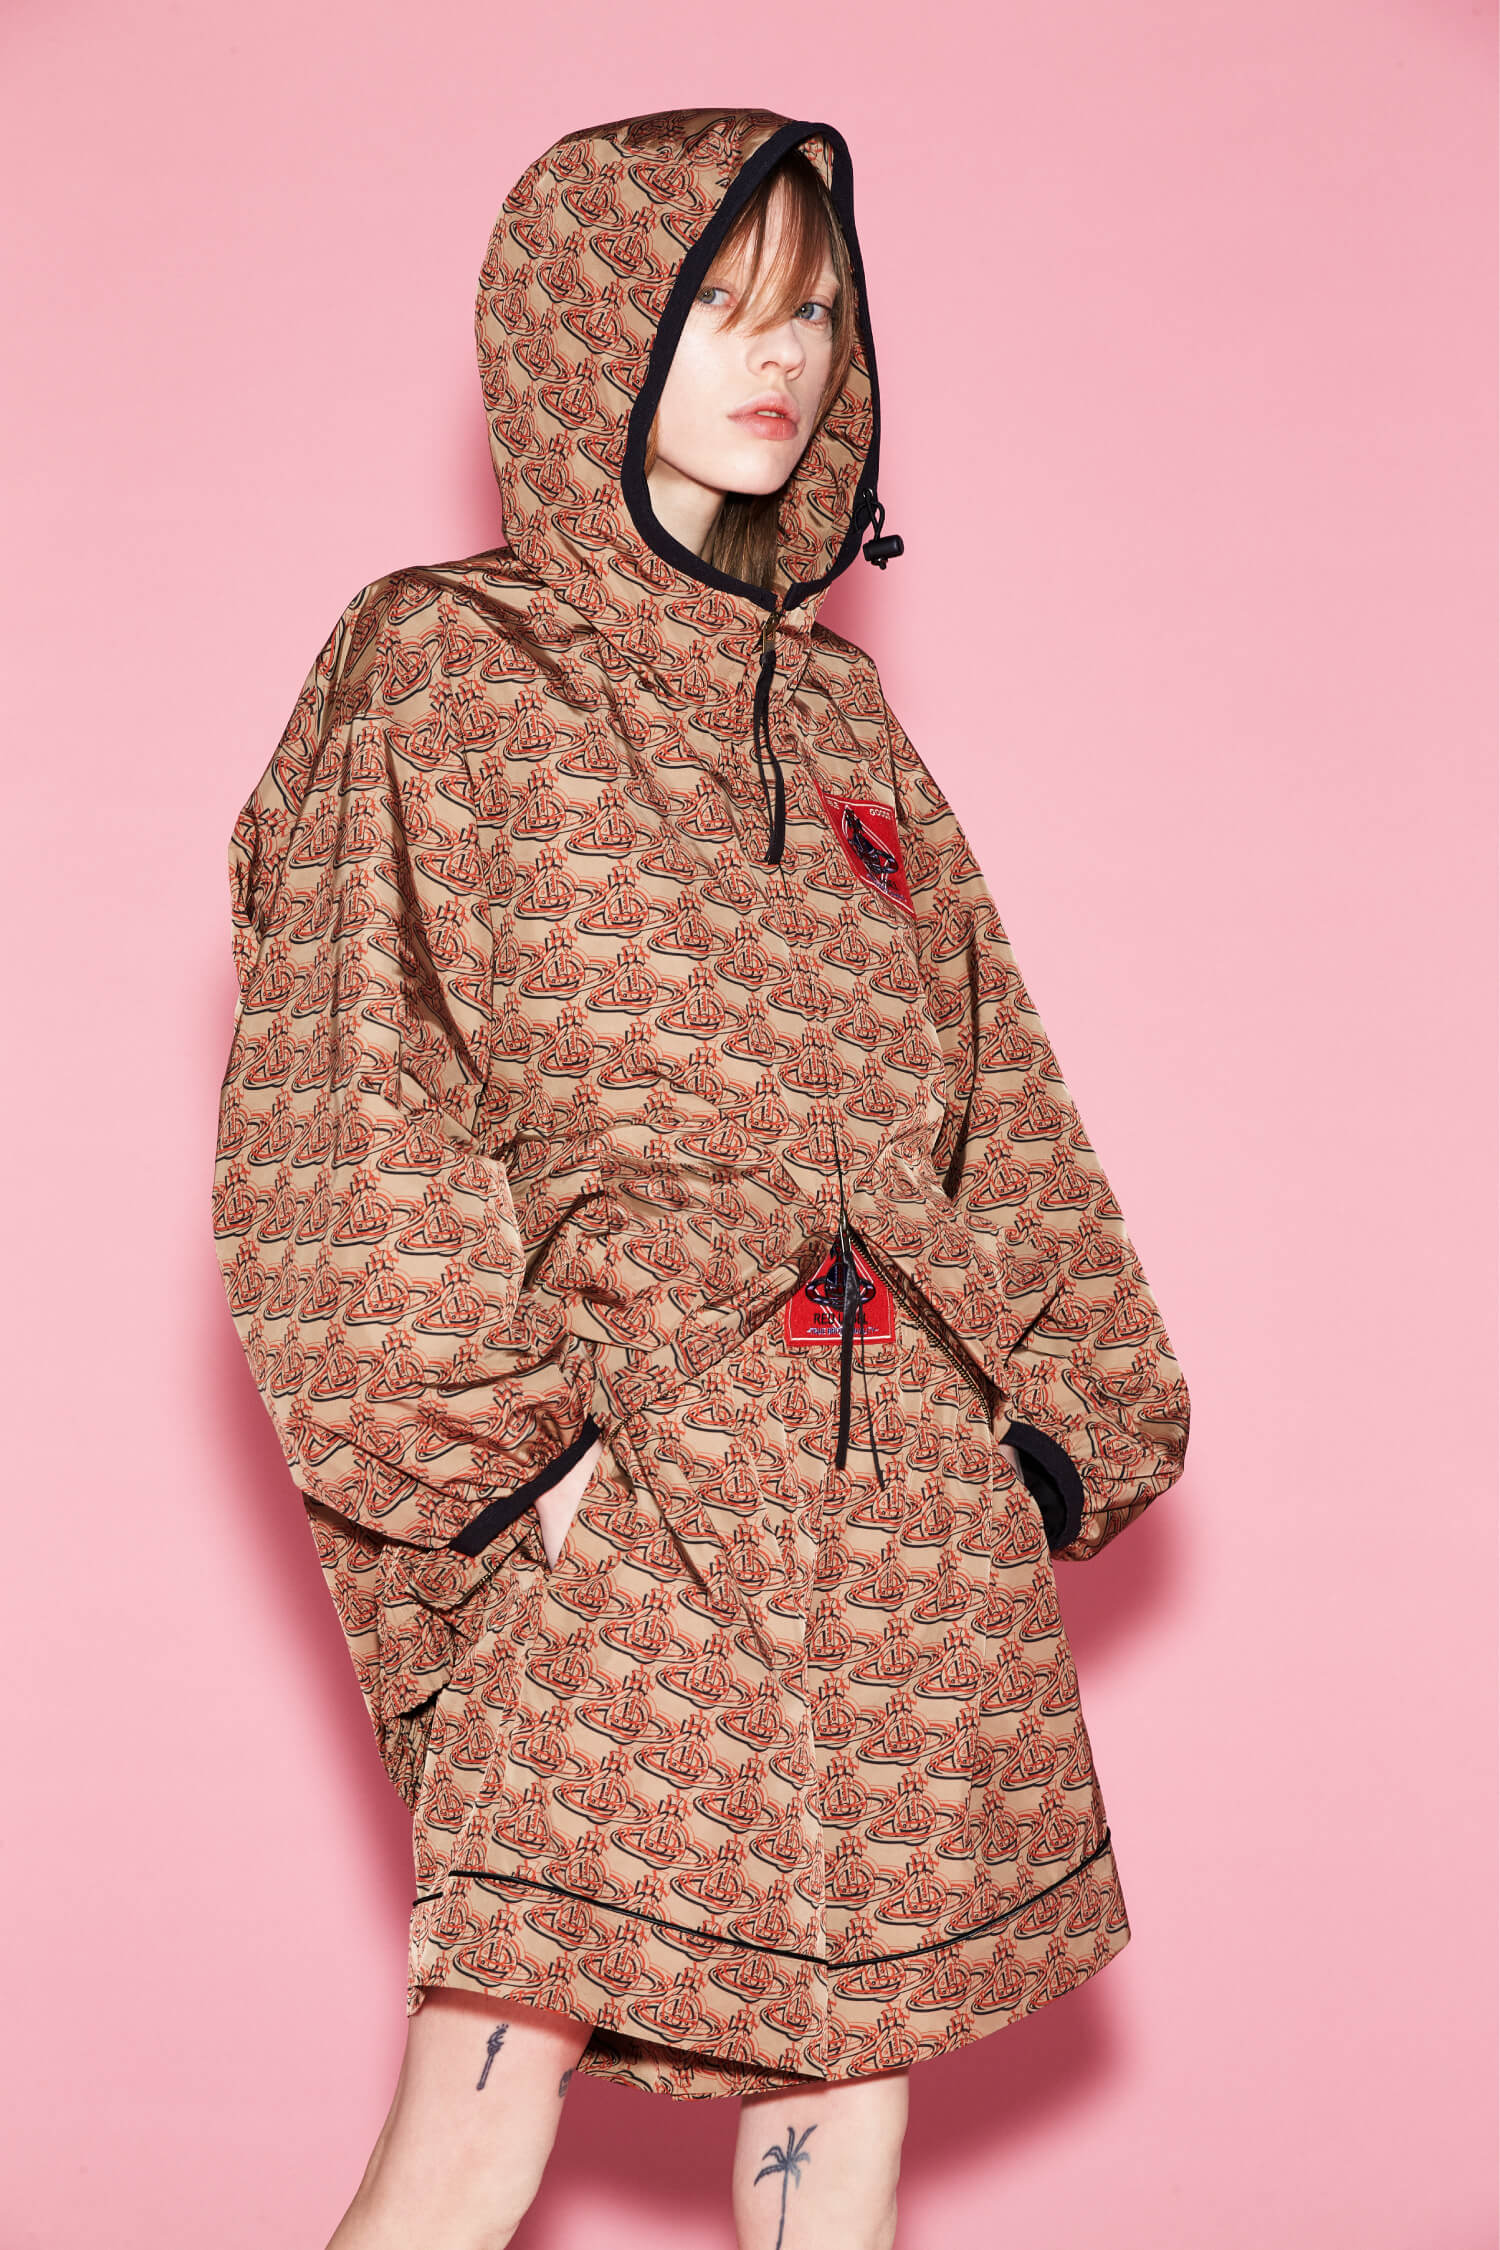 VIVIENNE WESTWOOD RED LABEL CAPSULE COLLECTION SPRING/SUMMER 21